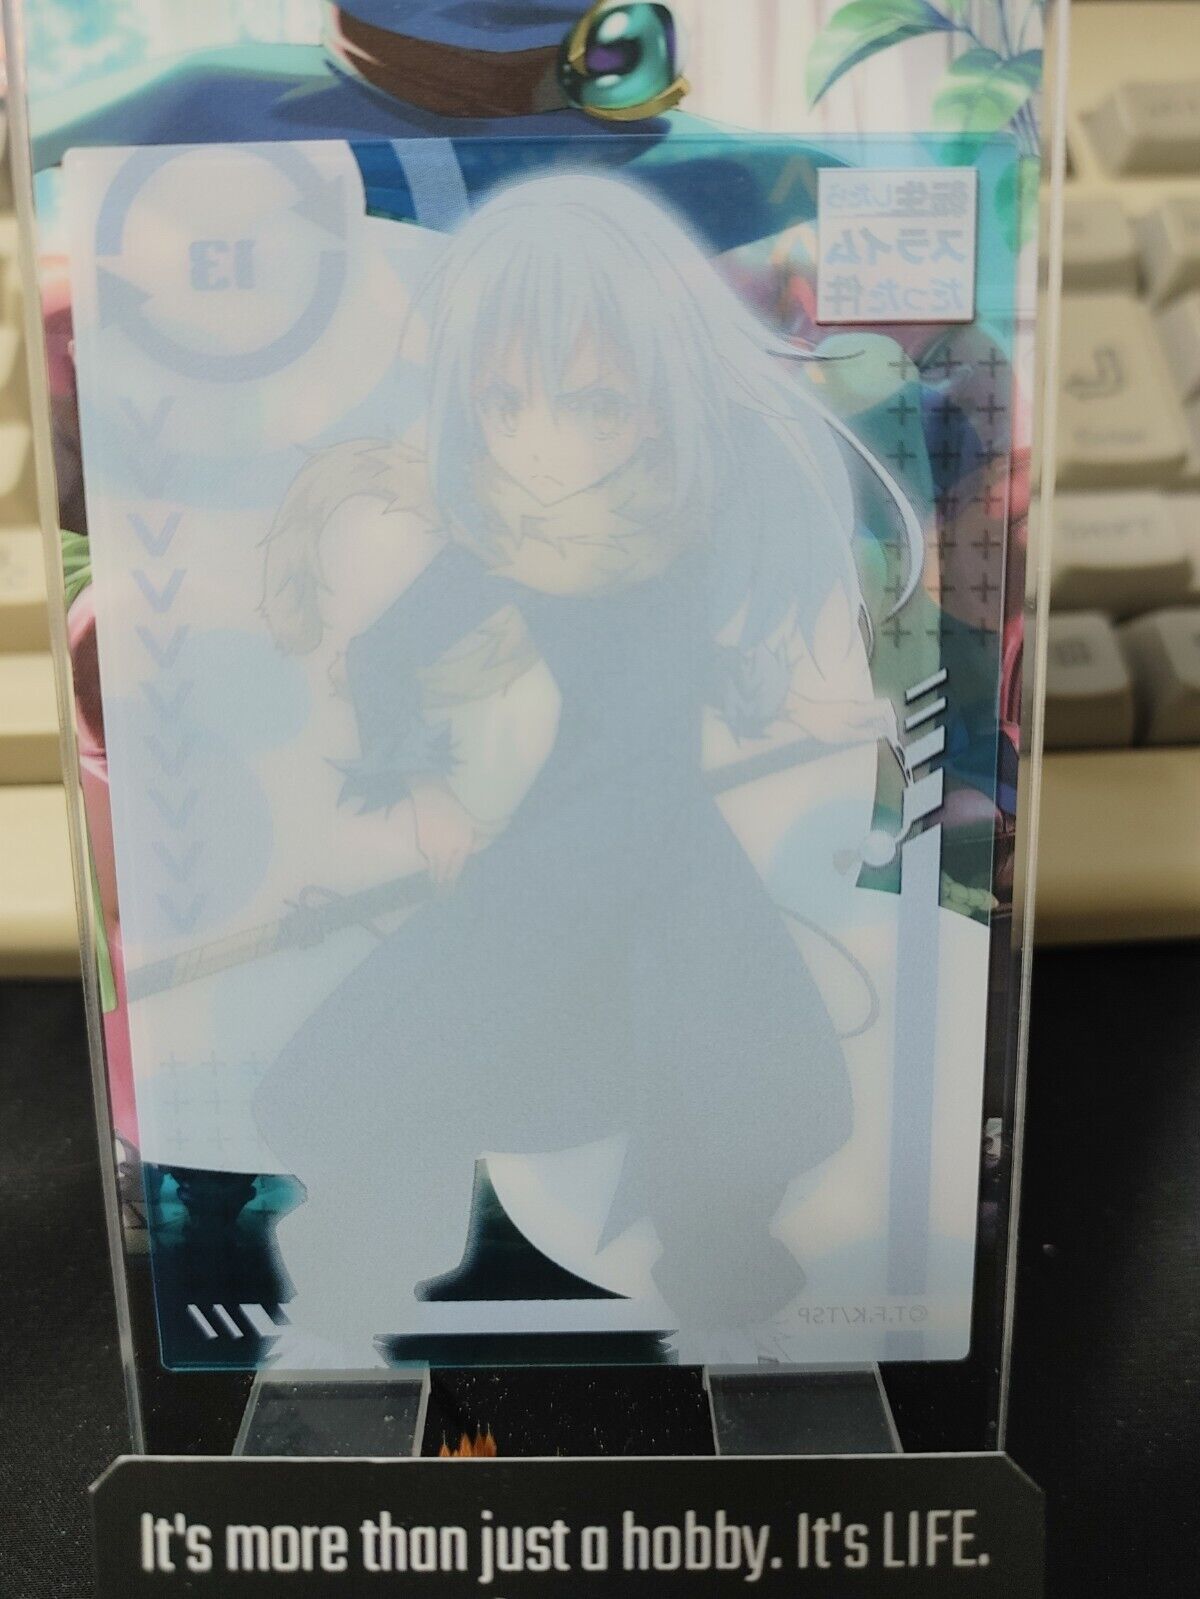 That Time I Got Reincarnated As A Slime Clear Card Collection Rimuru No. 13 JP